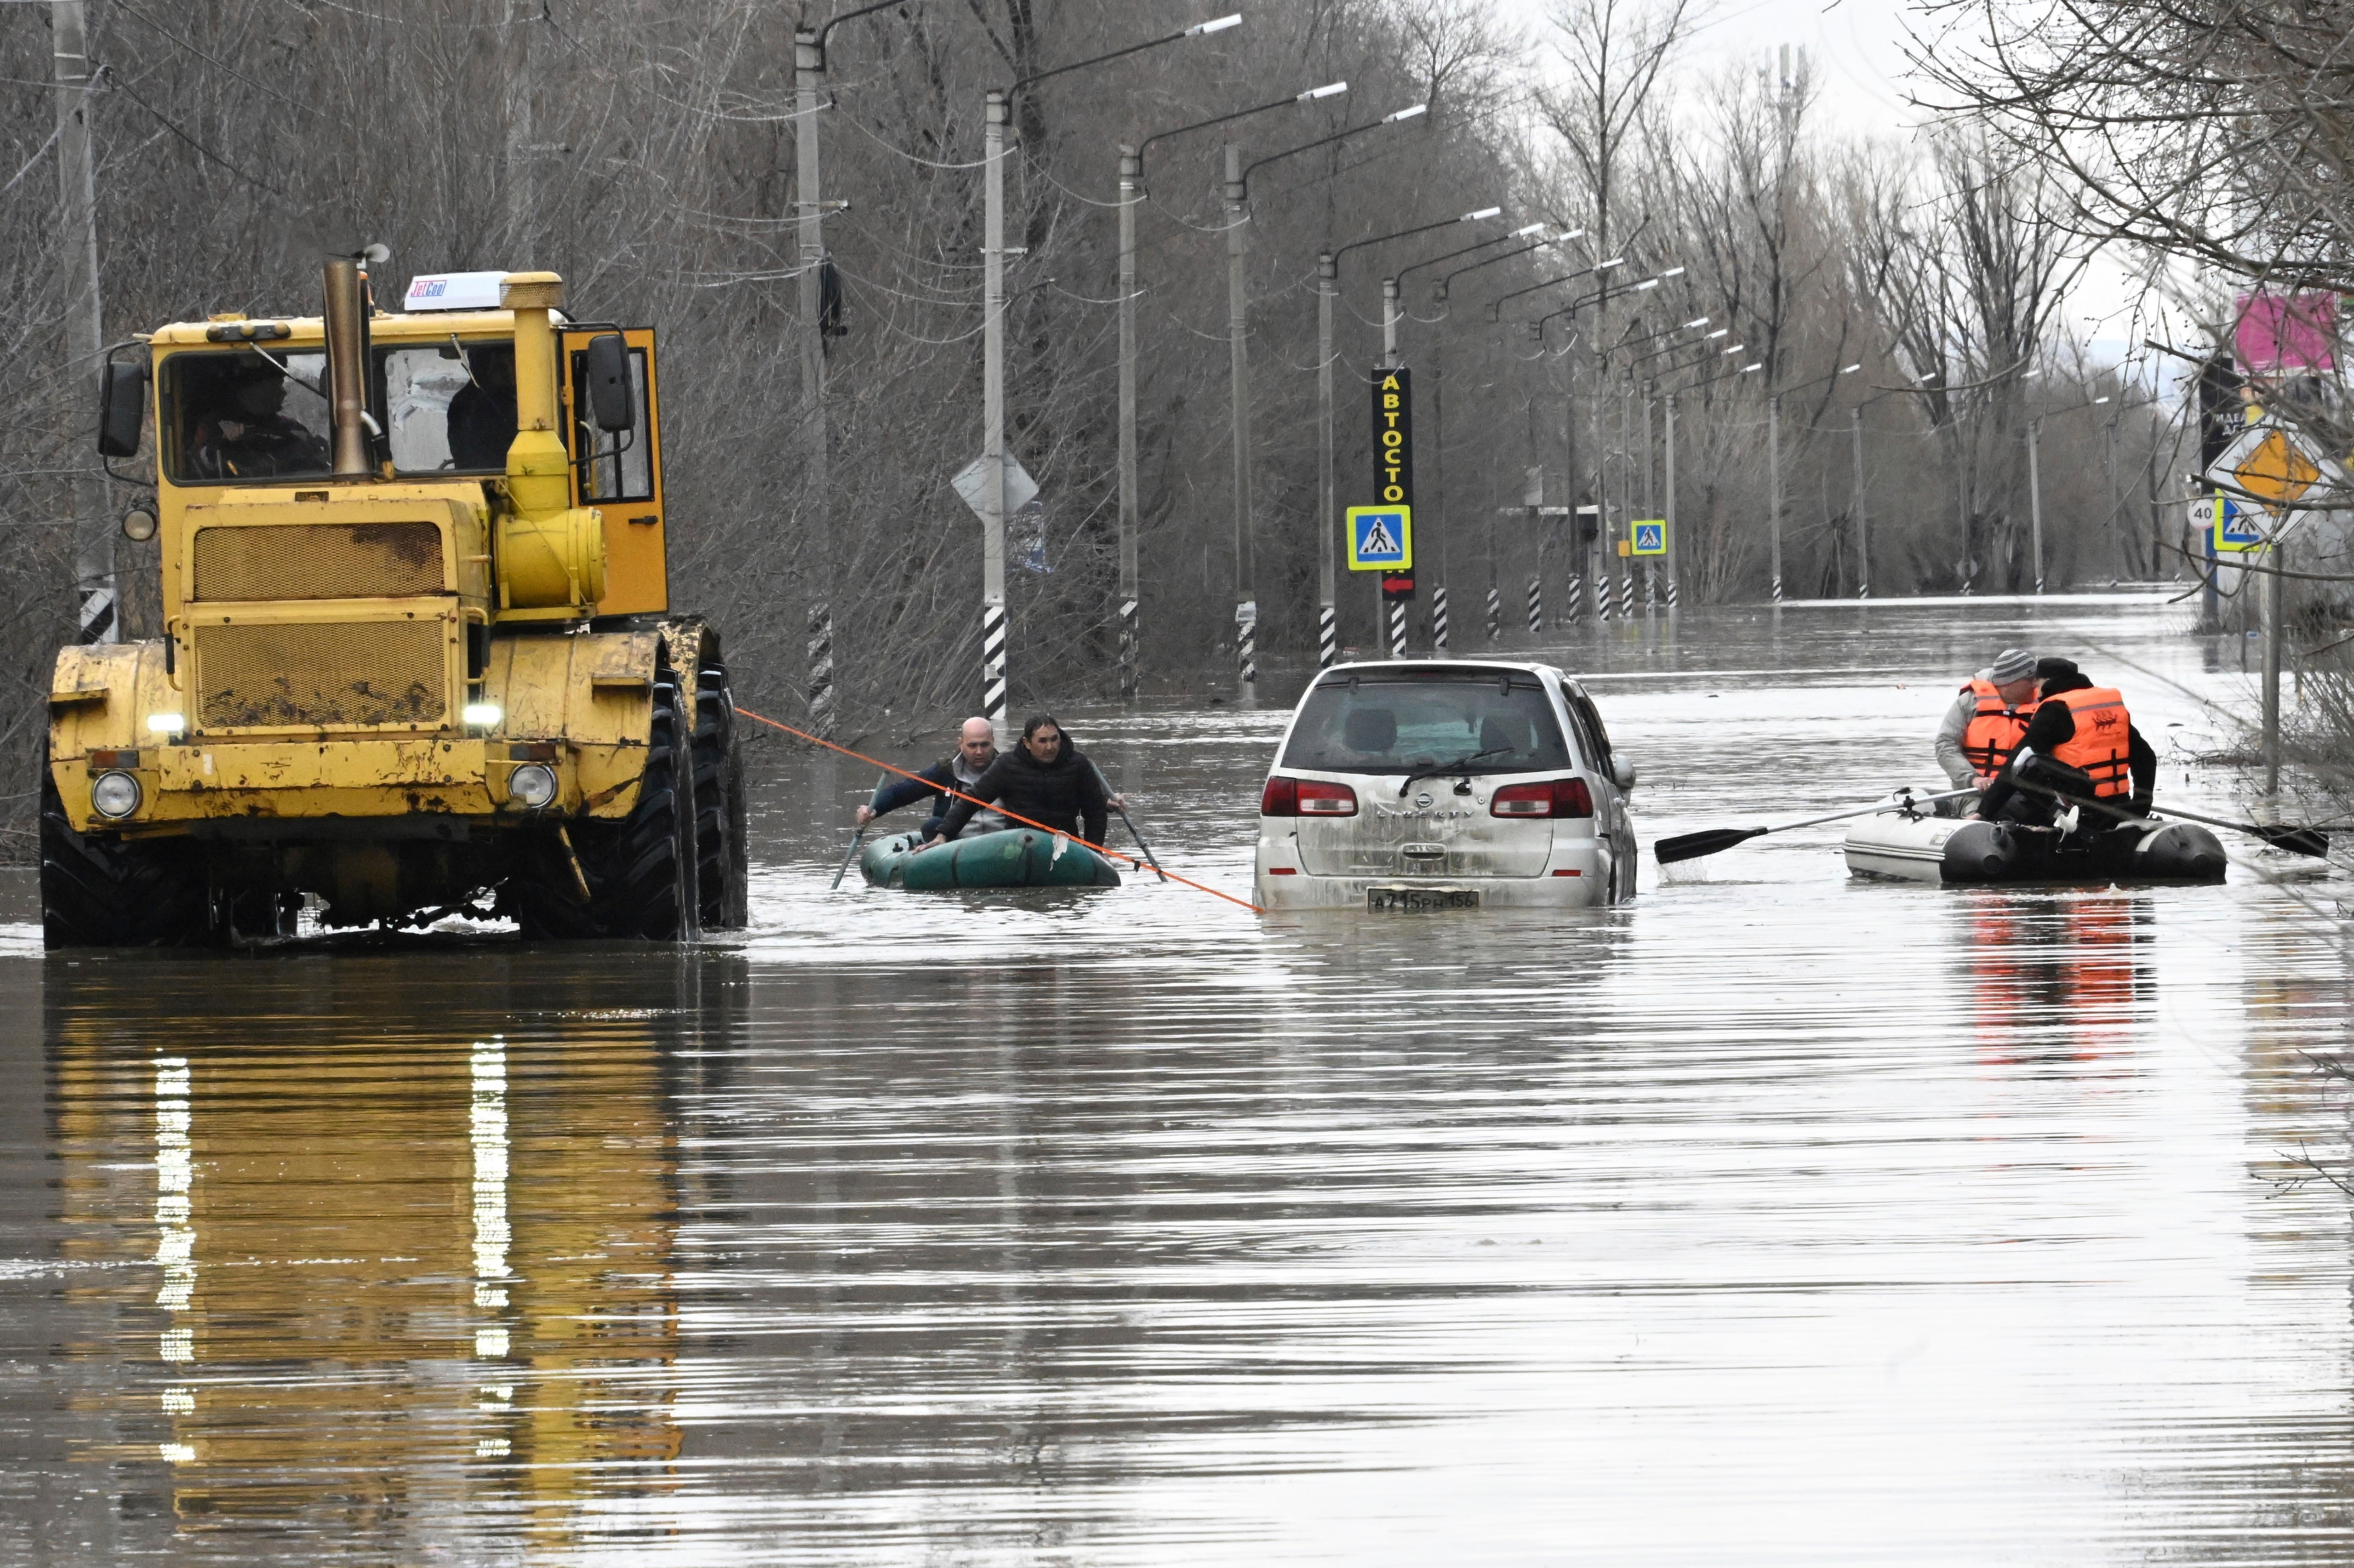 People use rubber boats in a flooded street after part of a dam burst, in Orsk, Russia